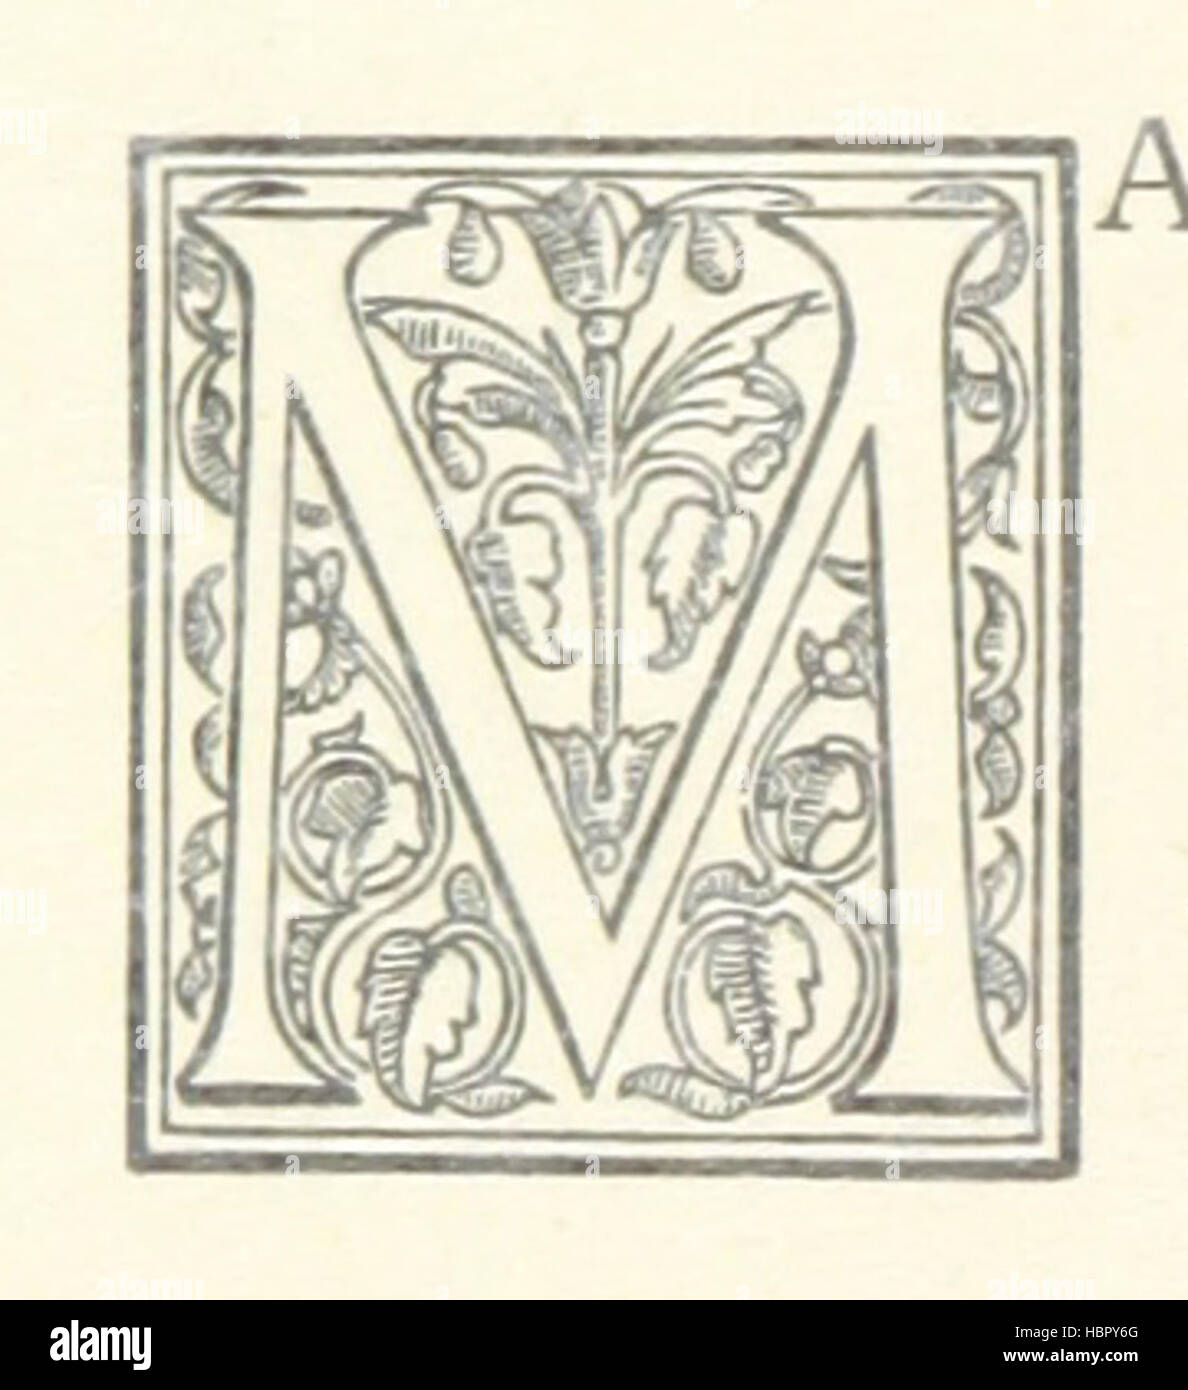 Image taken from page 310 of 'The History of the Parish of Rochdale in the county of Lancaster' Image taken from page 310 of 'The History of the Stock Photo